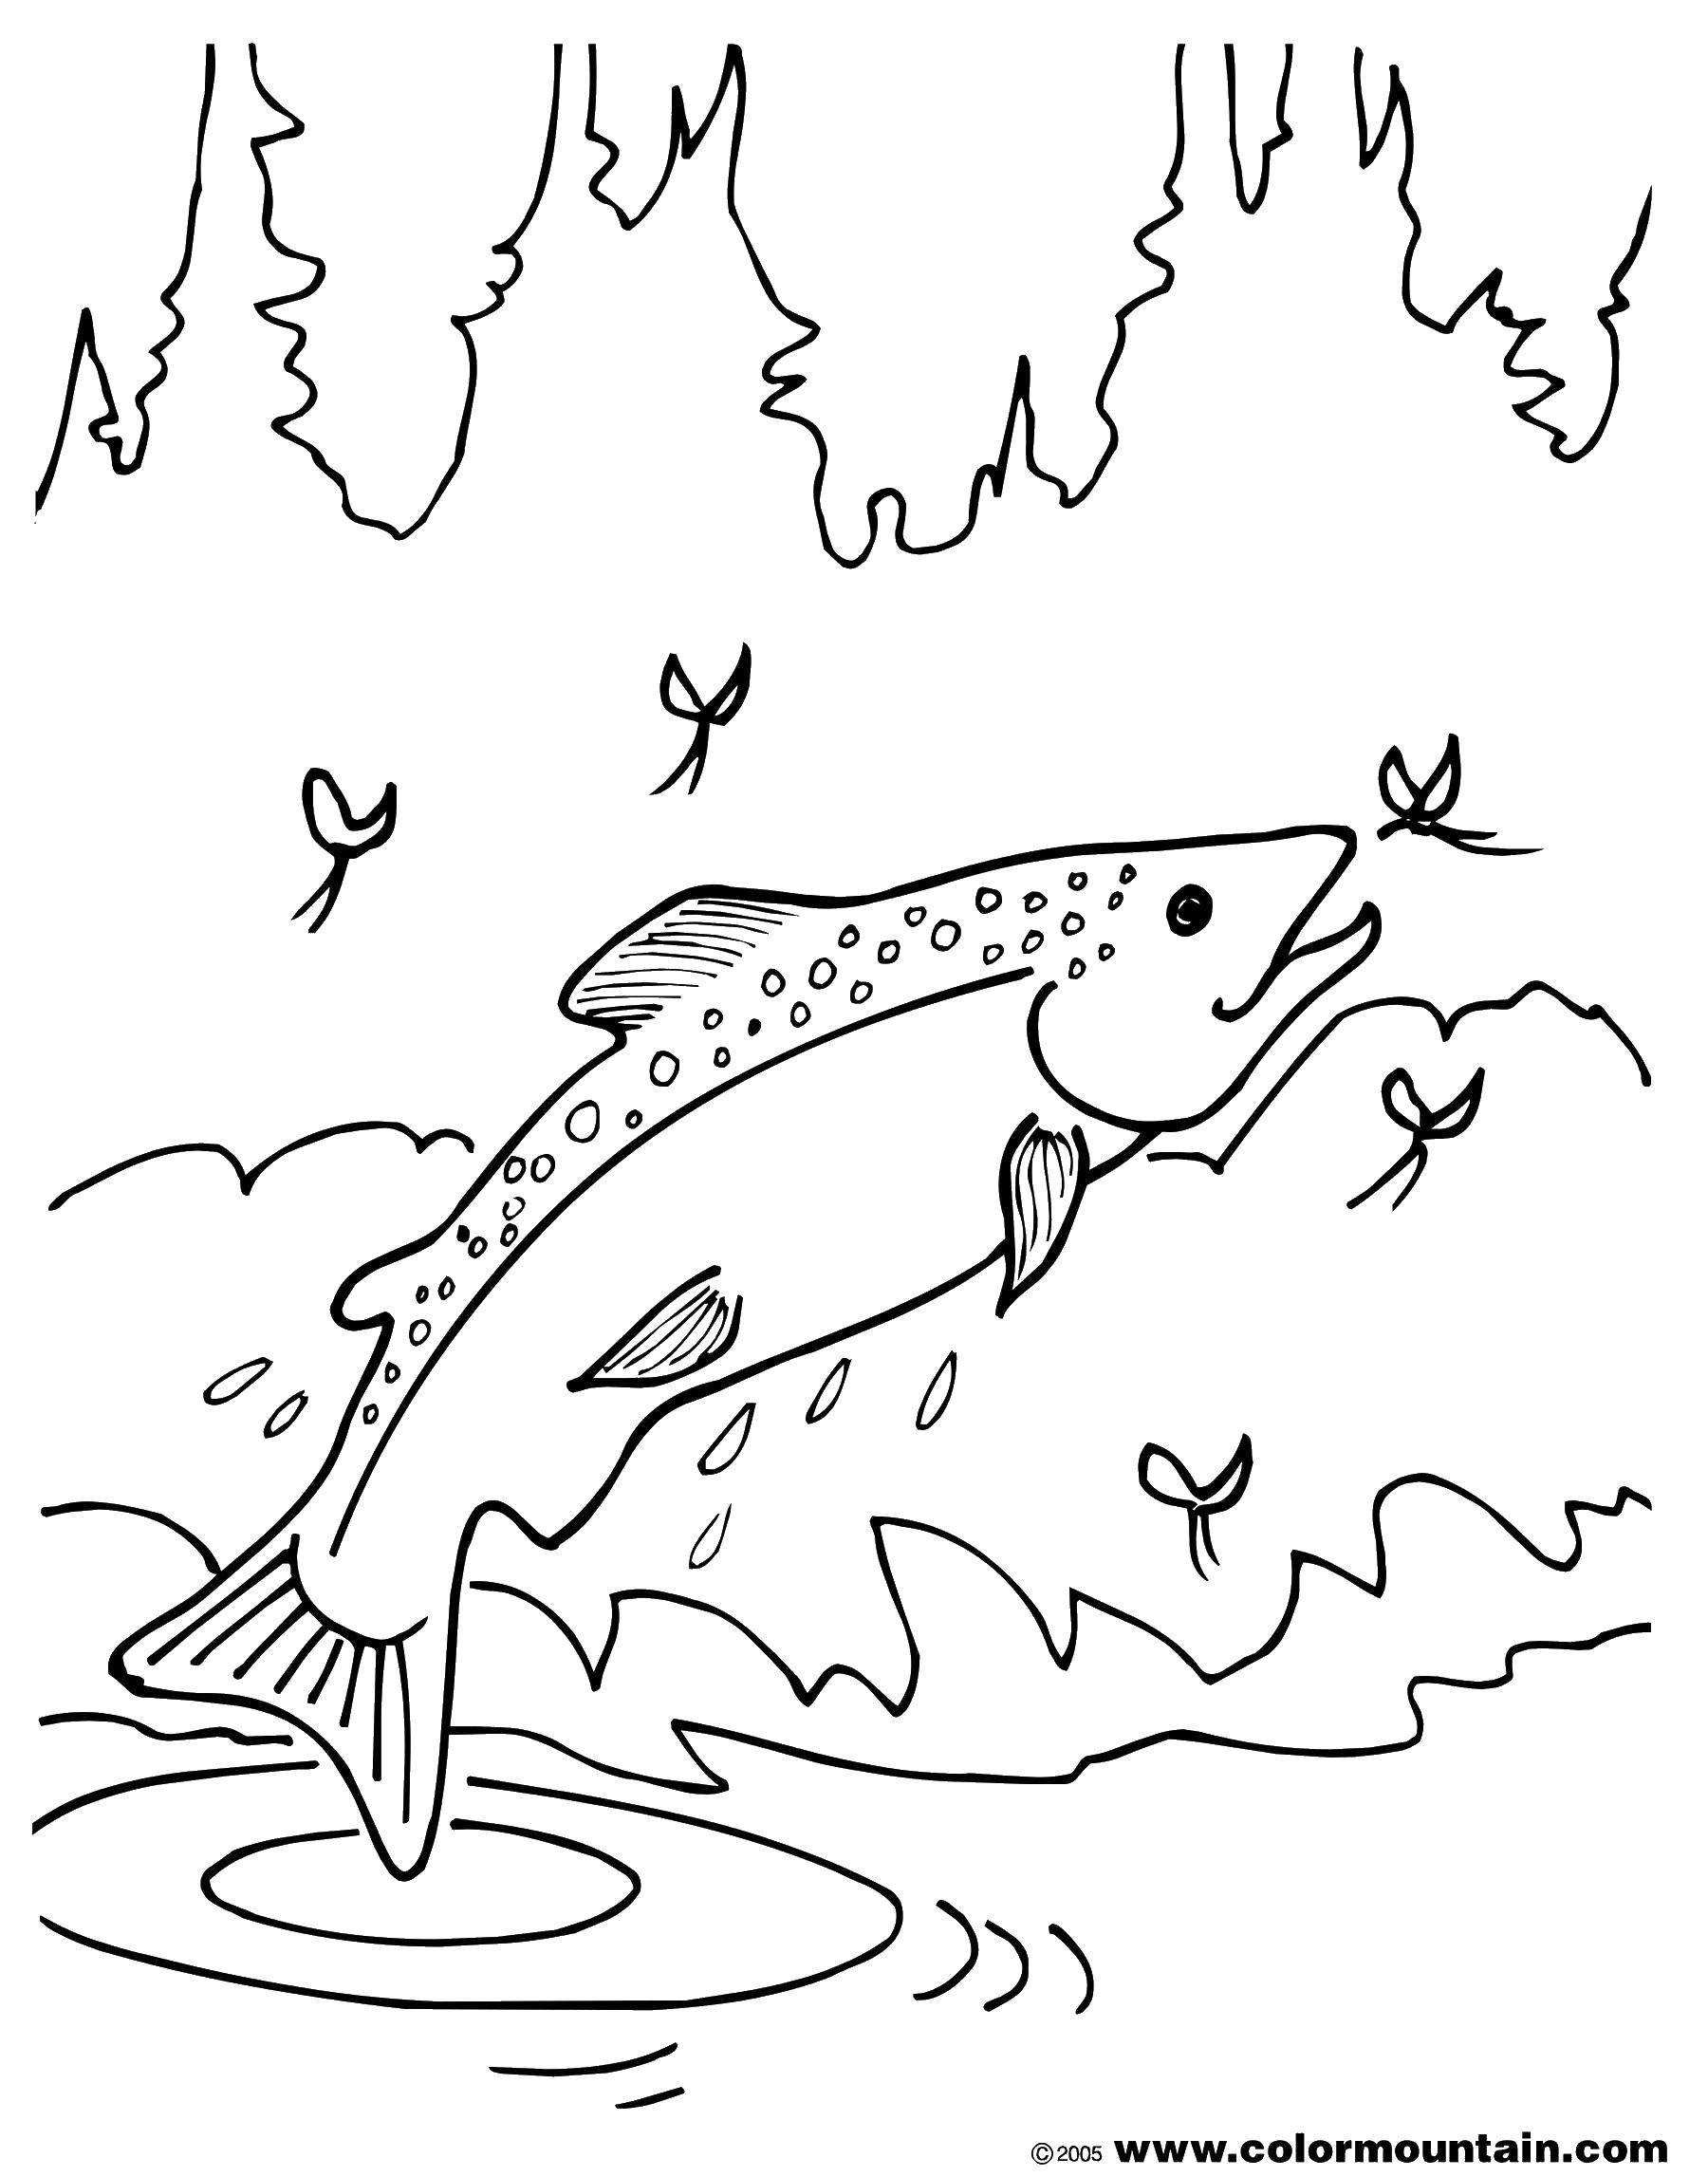 Coloring Fish and mosquitoes. Category fish. Tags:  fish, mosquitoes, water.